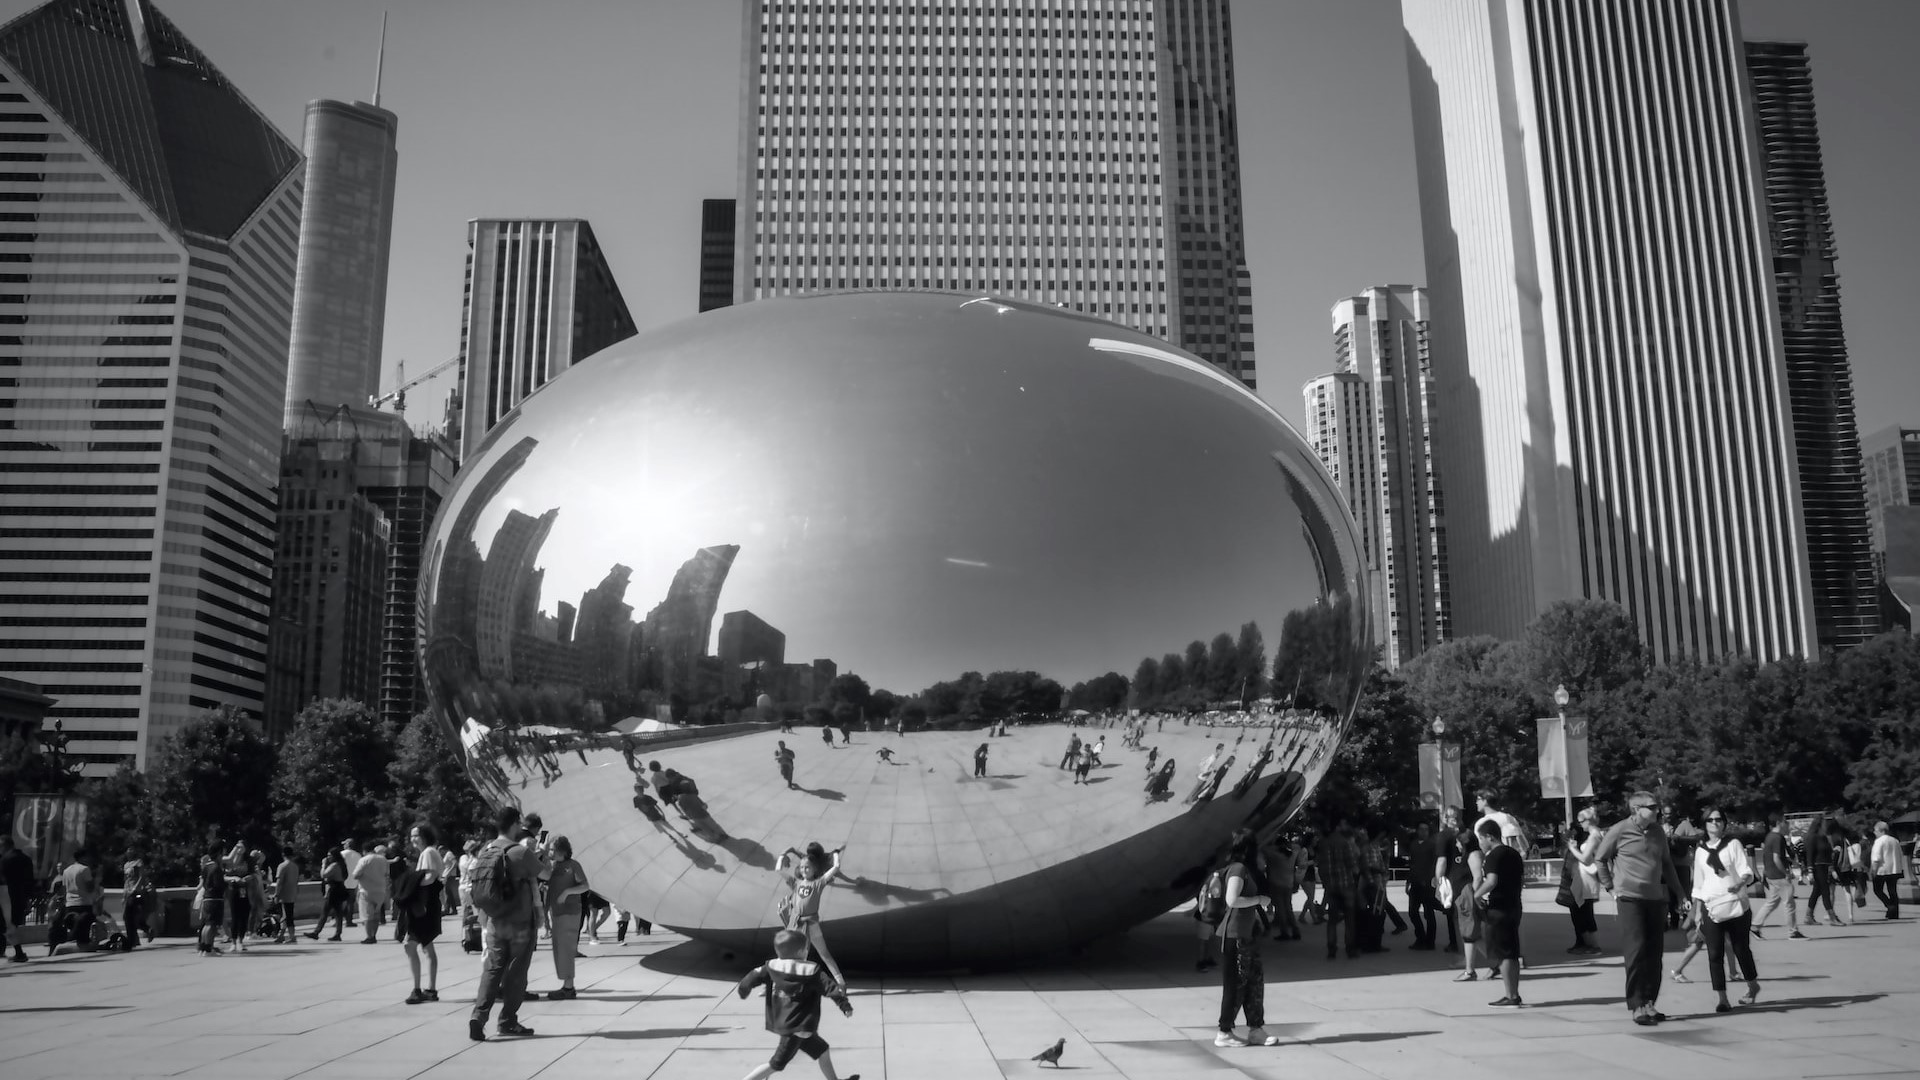 The bean in Illinois | Goodwill Car Donations